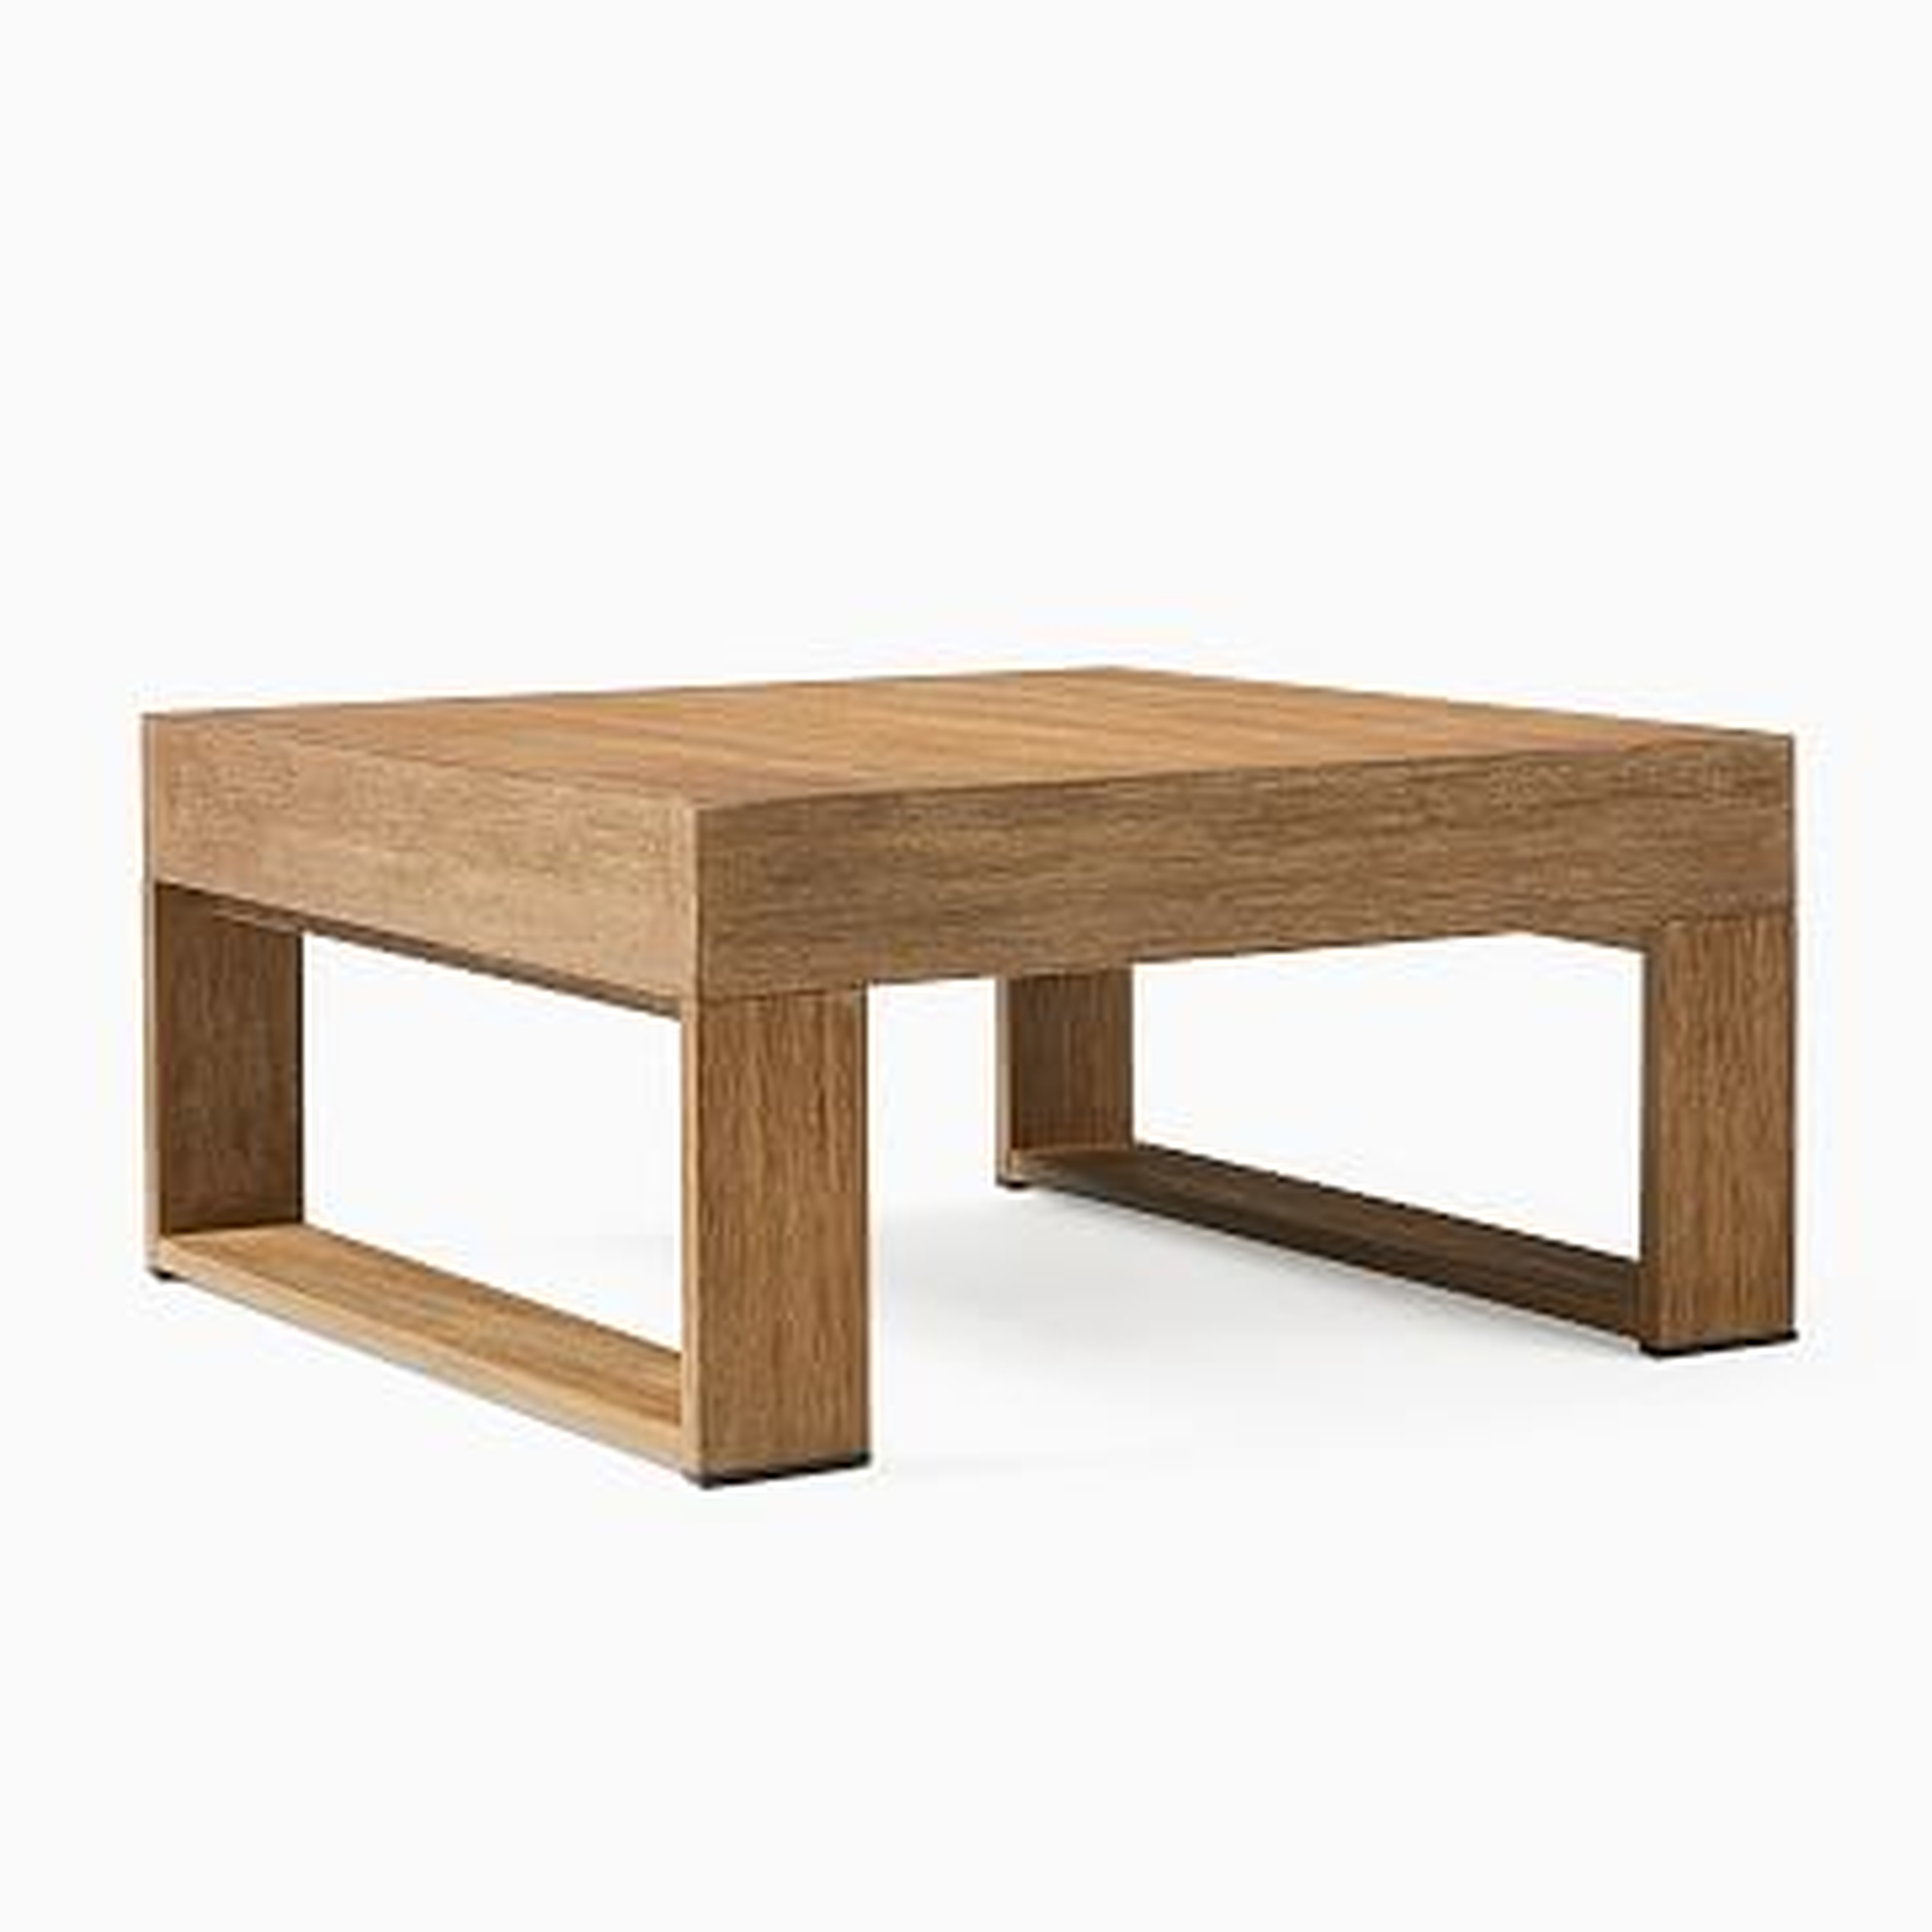 Portside Square Coffee Table, 32", Driftwood - West Elm